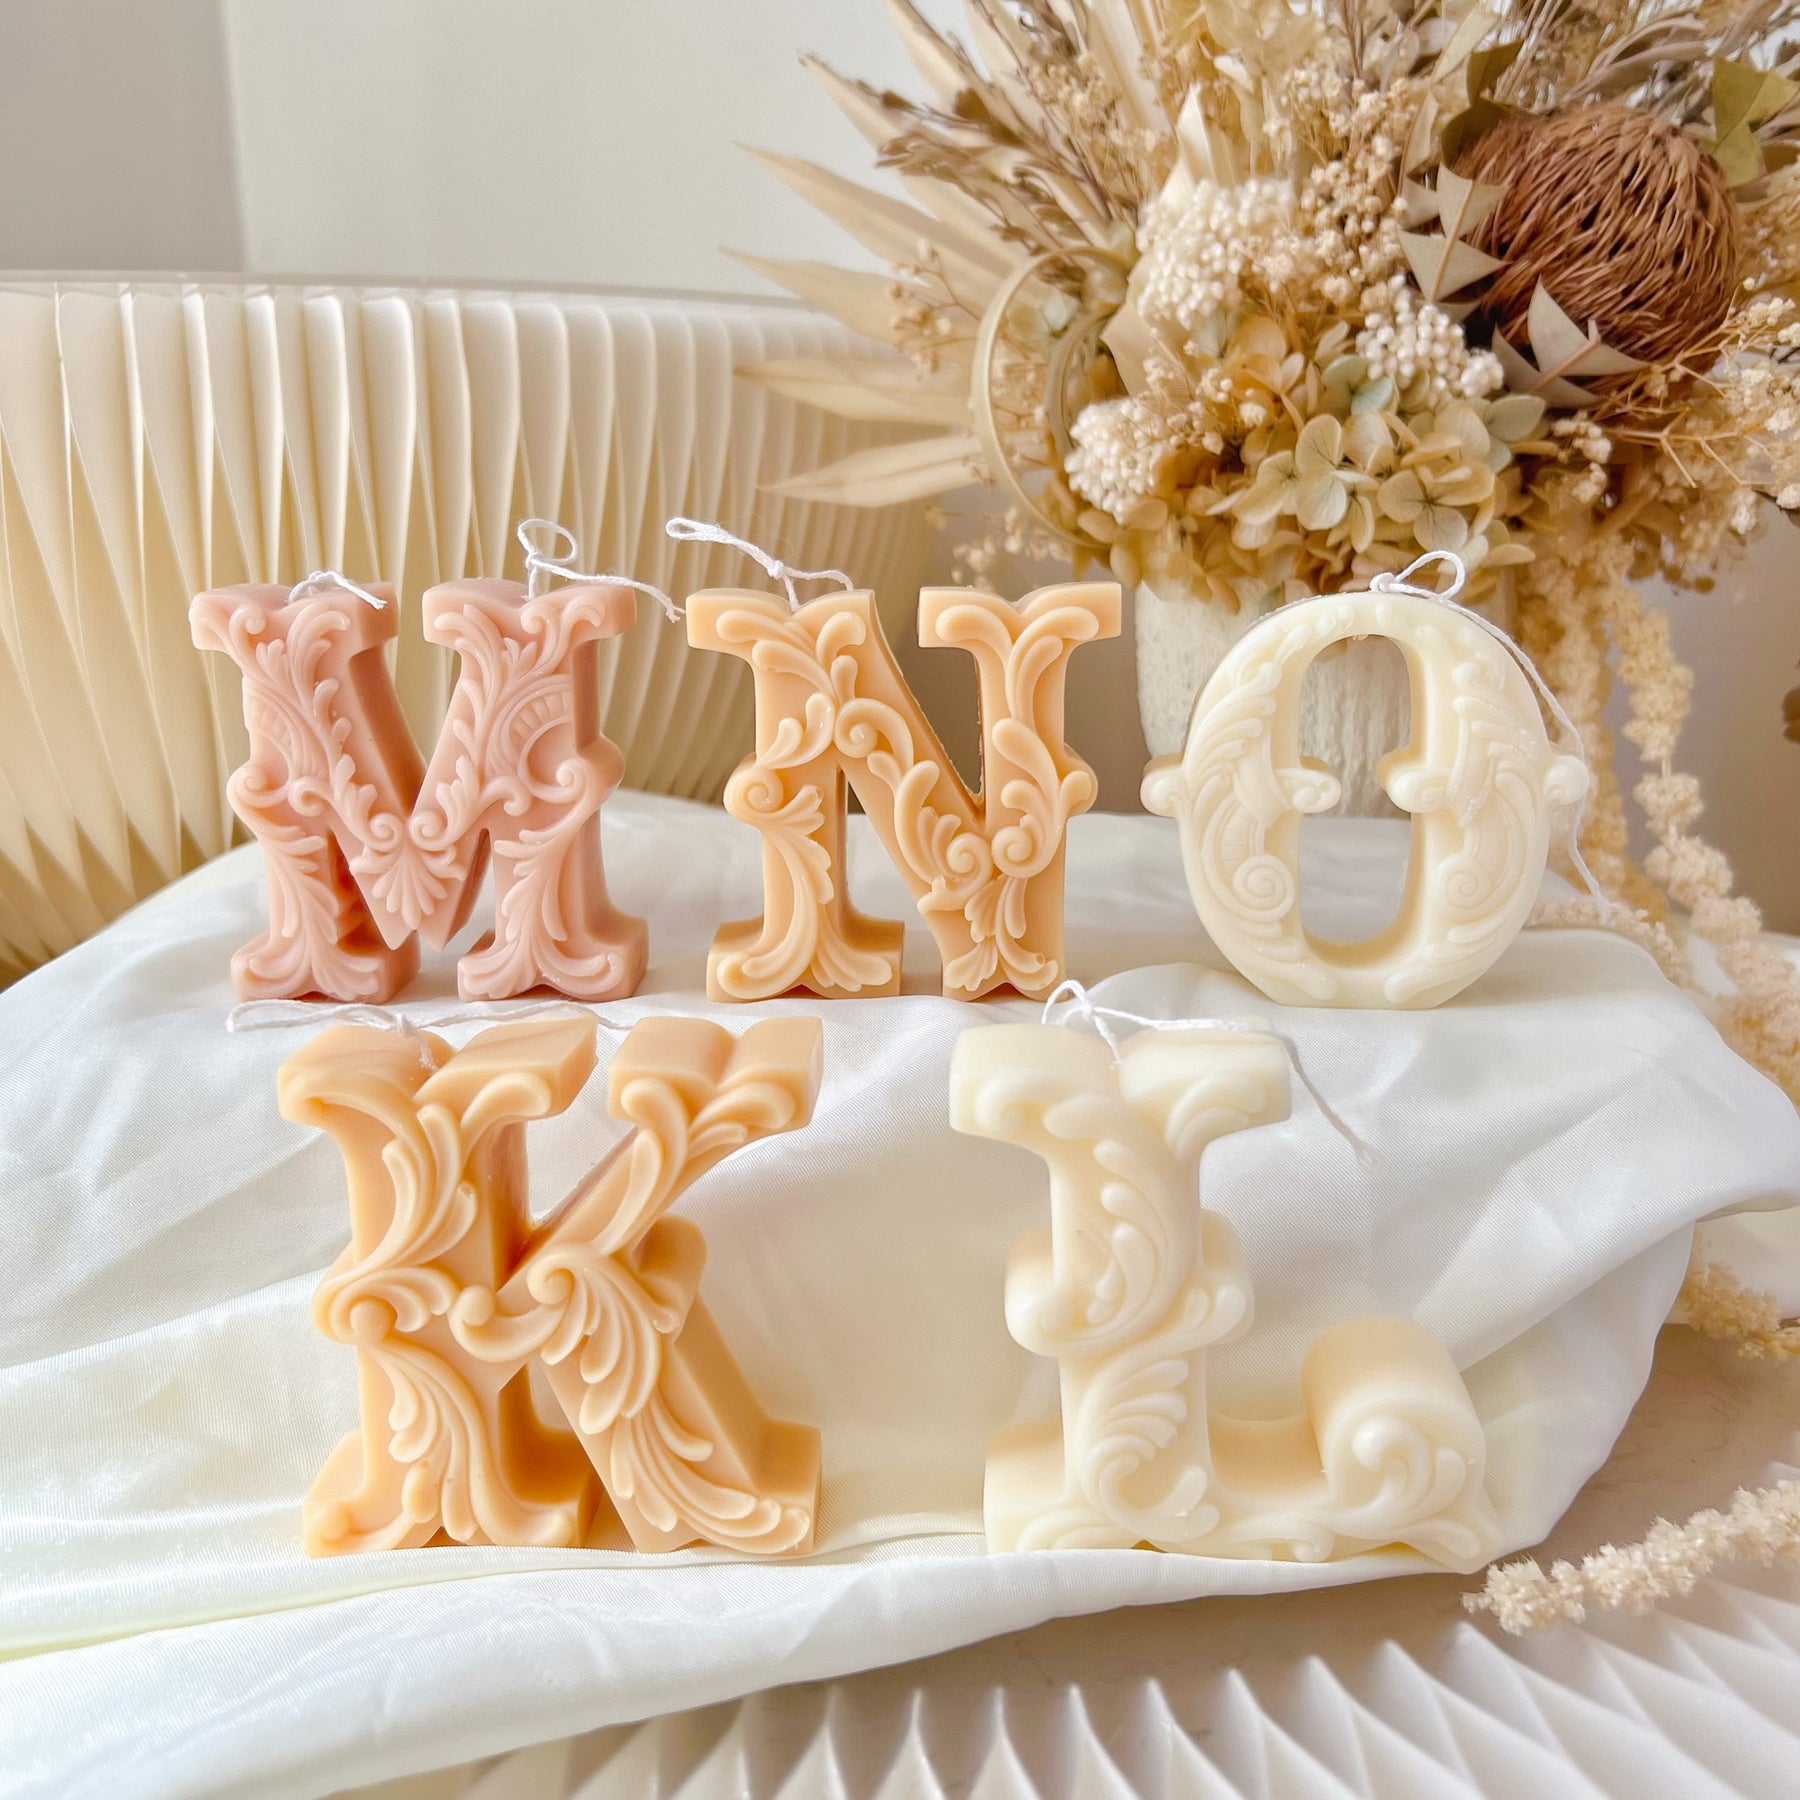 Vintage Alphabet Letter Candle - Personalized Gift Idea | LMJ Candles